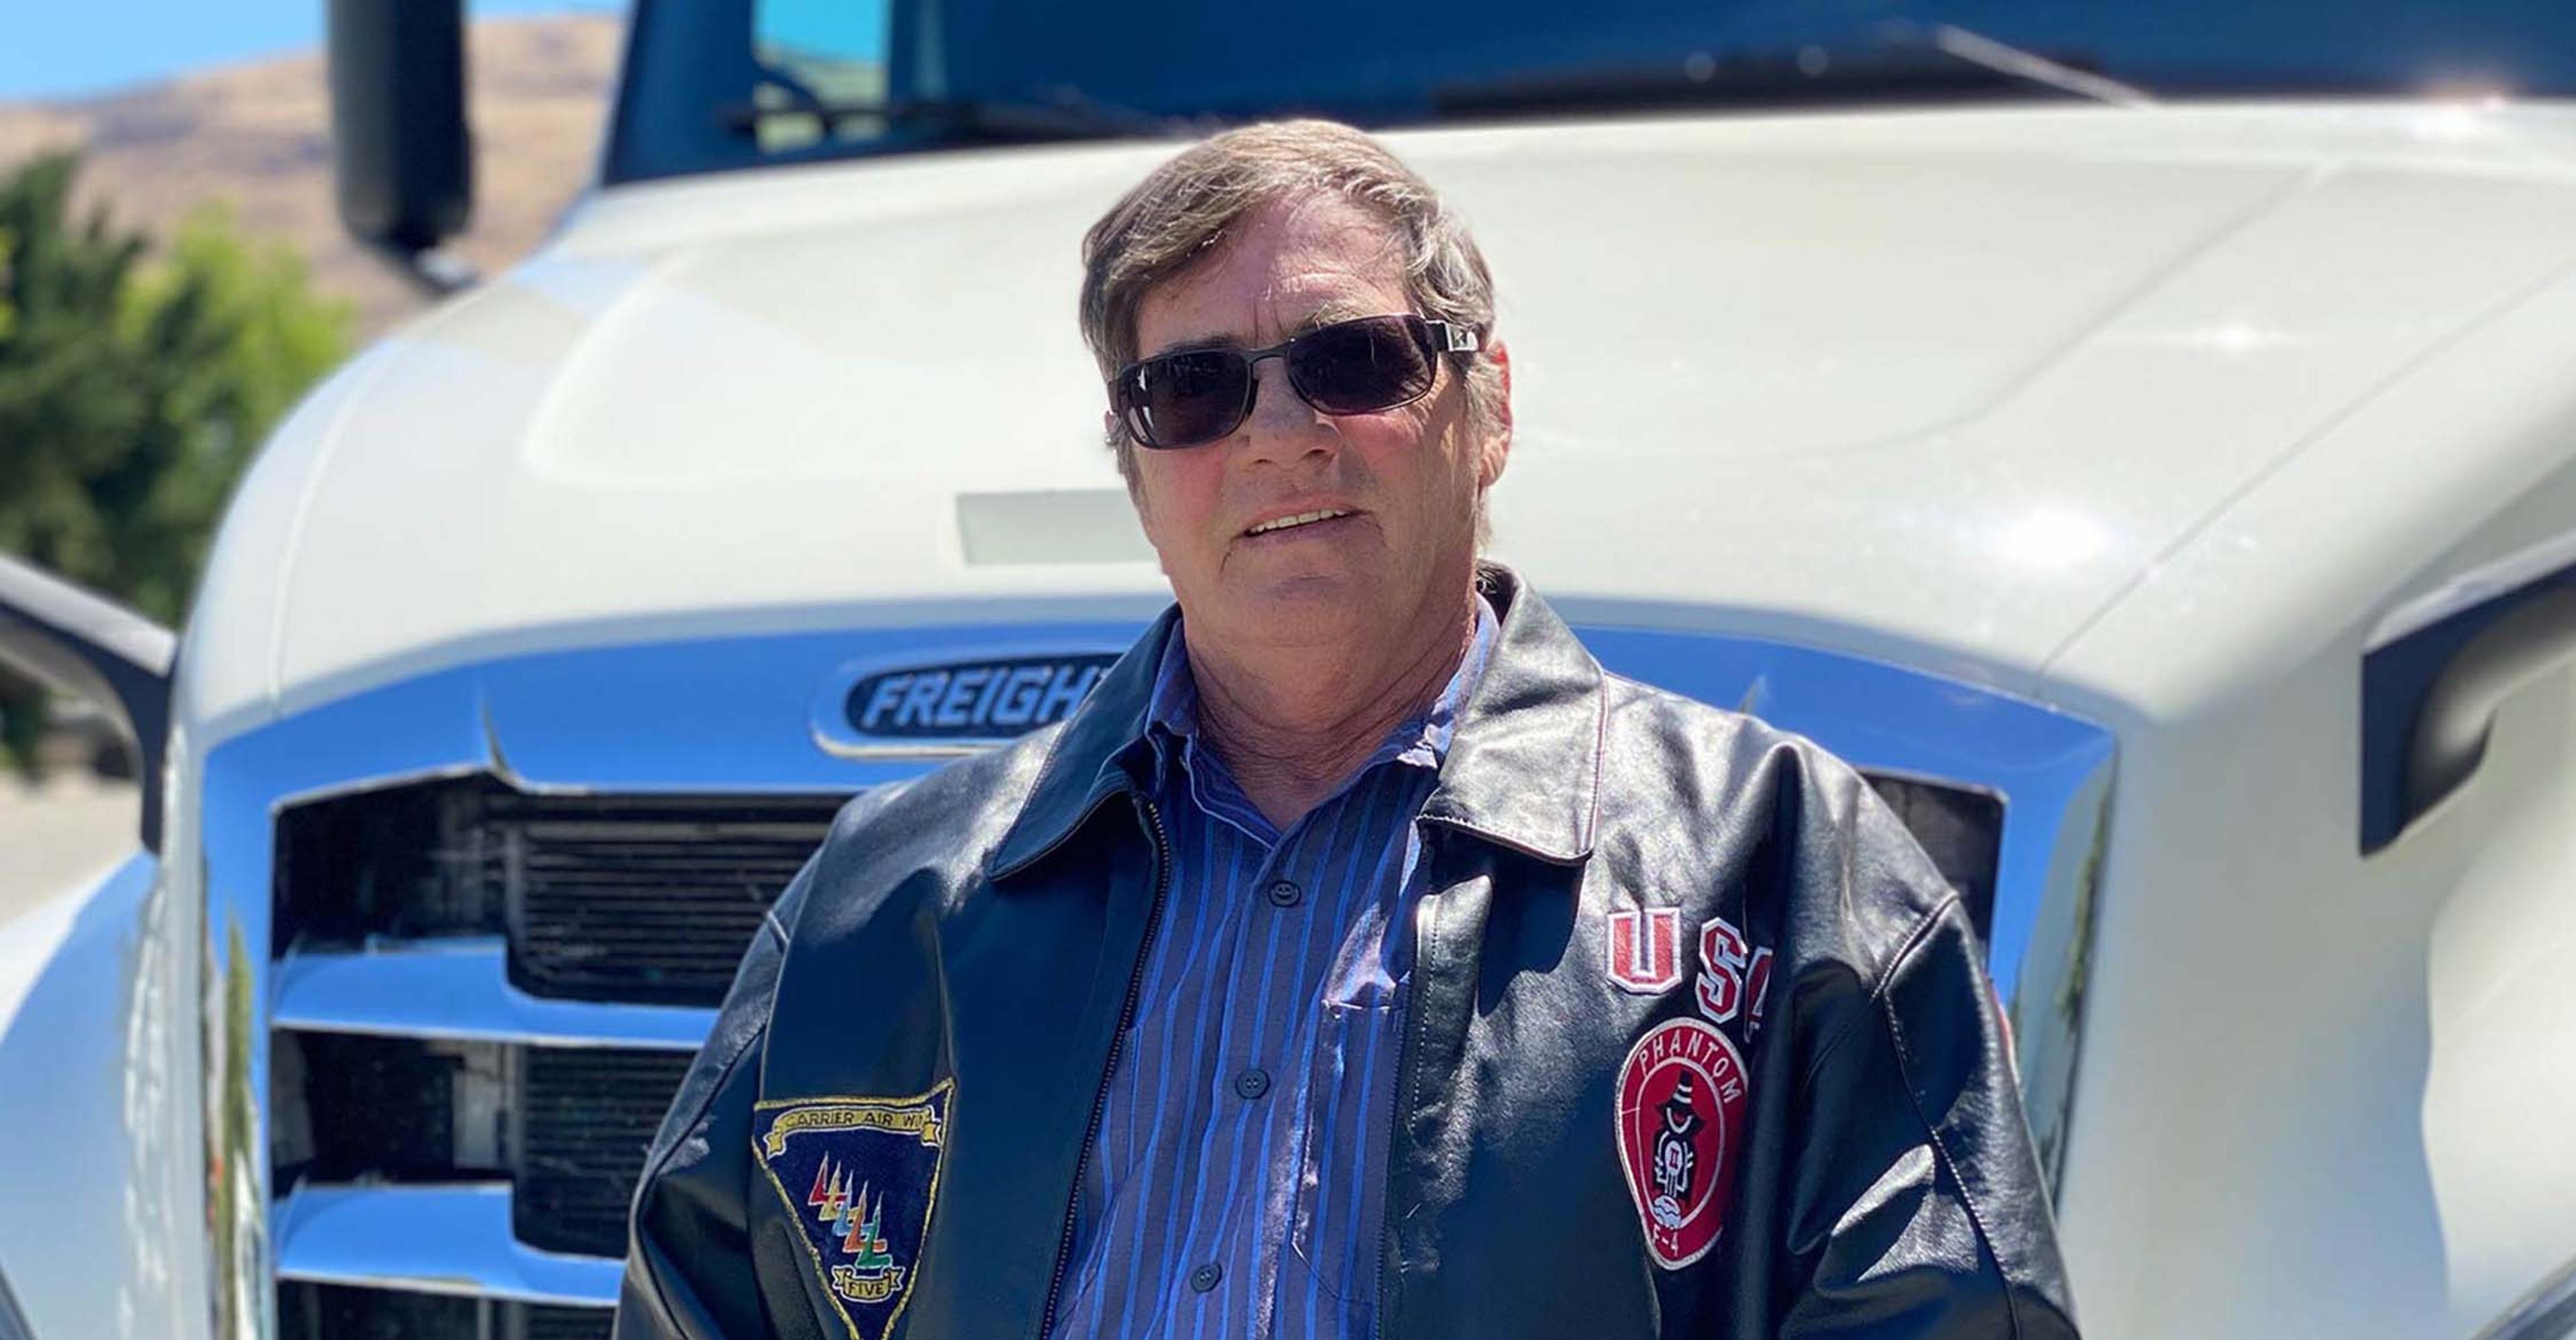 A veteran truck driver standing in front of a truck